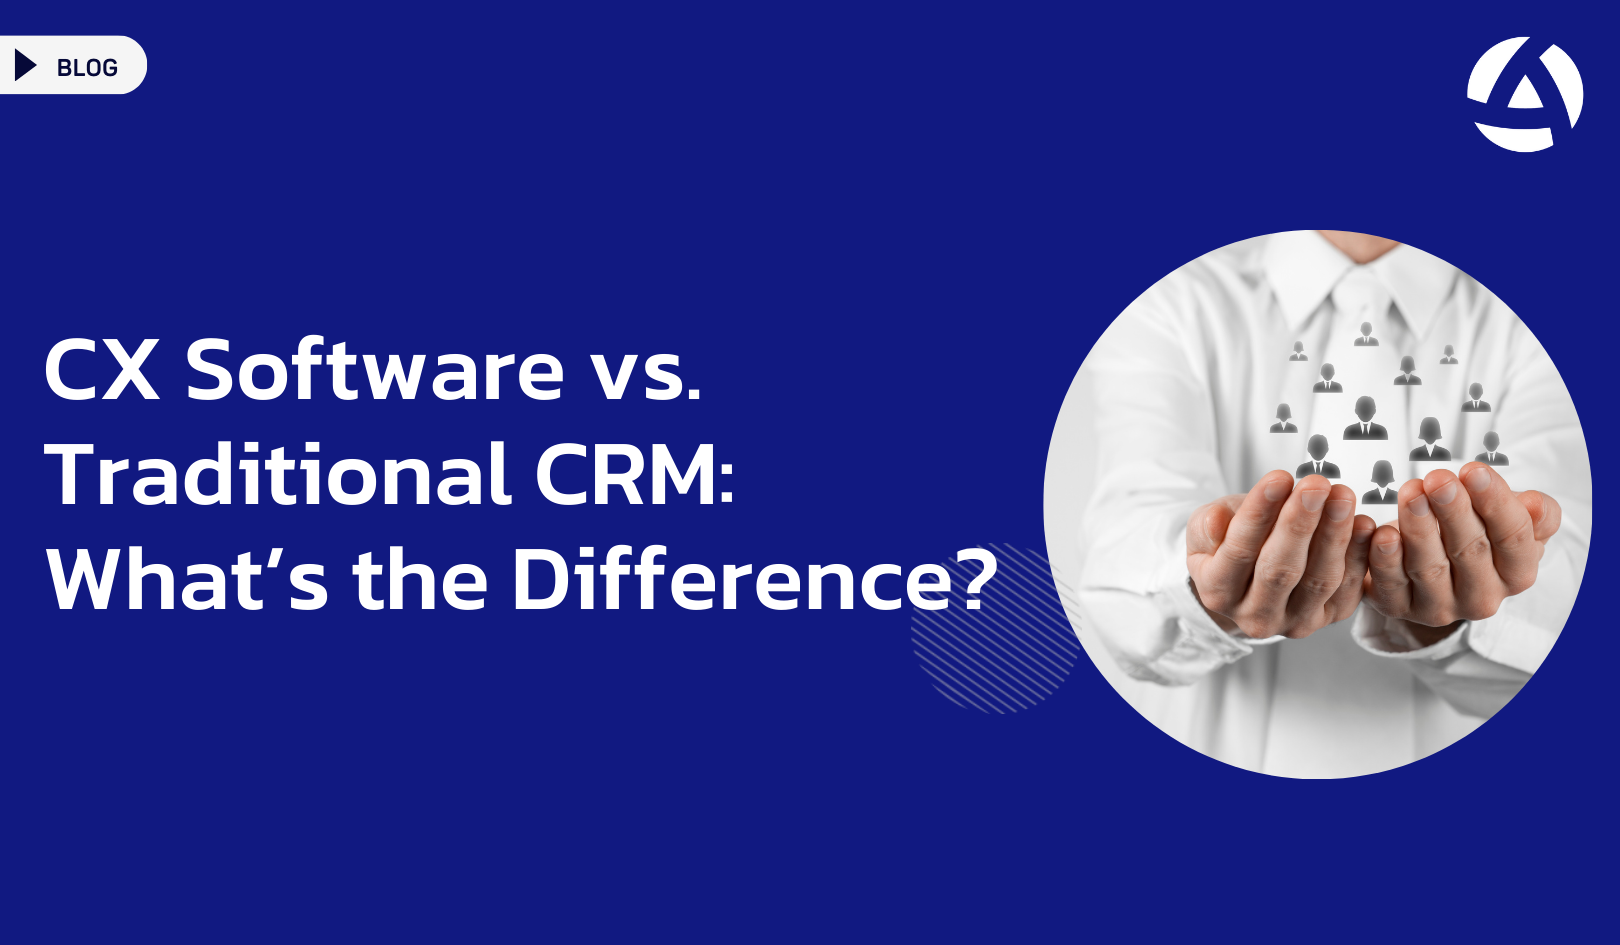 CX Software vs. Traditional CRM What’s the Difference